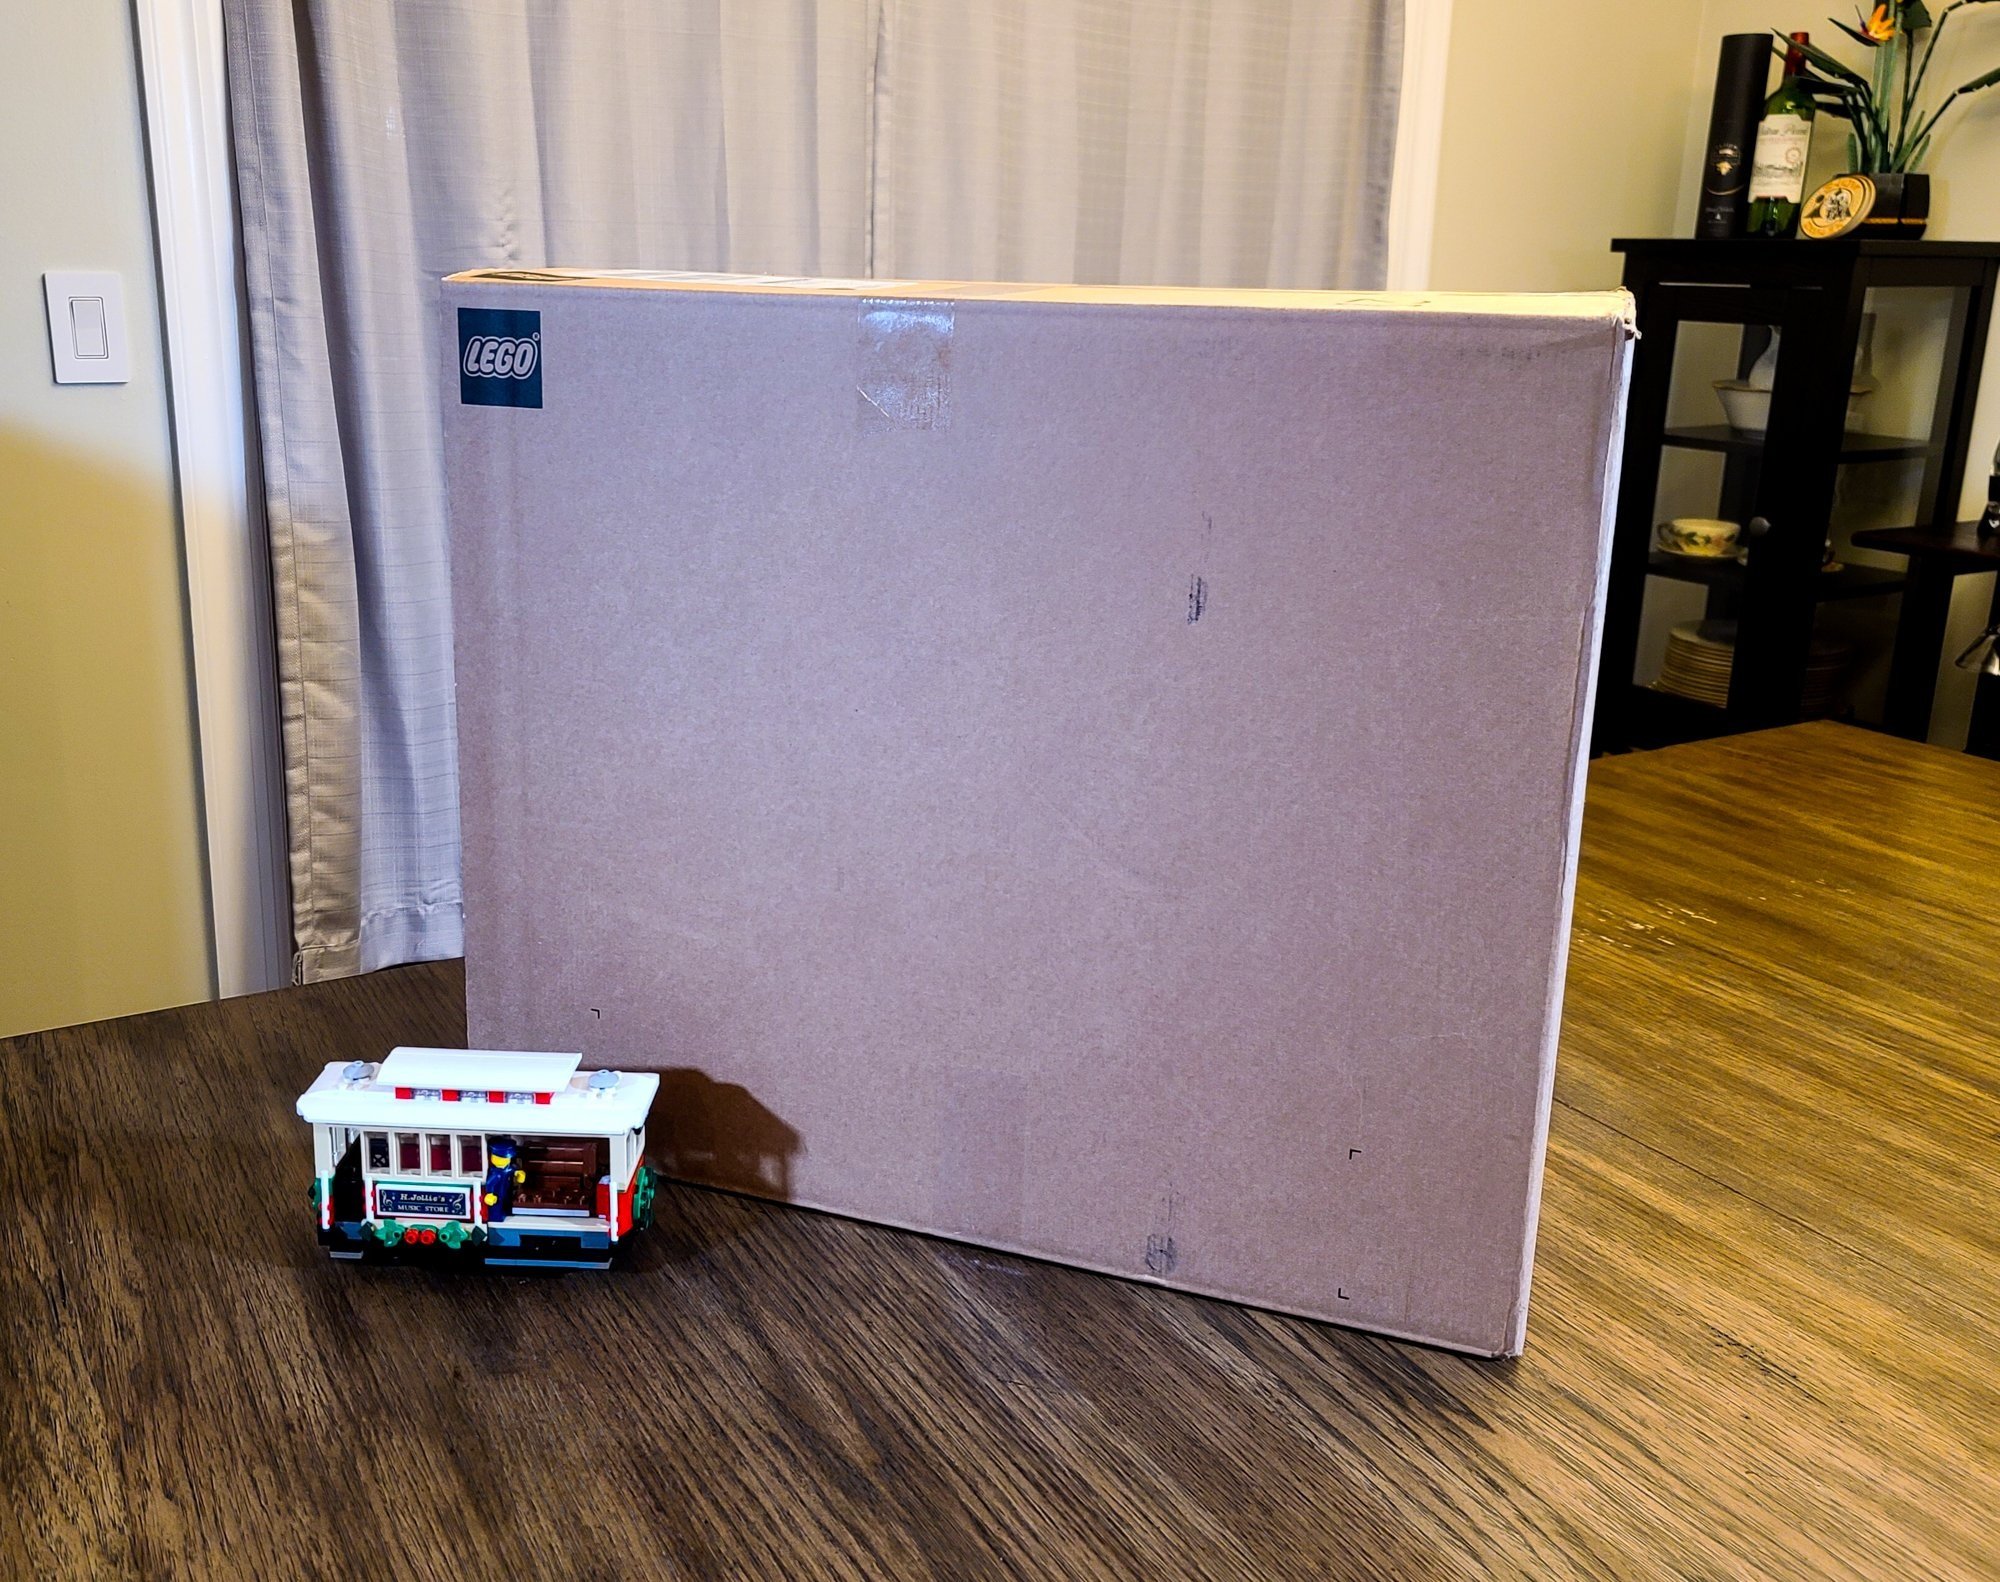 Whoa, this Christmas tree box is huge! It won’t fit in my normal build area, so I’ve commandeered the kitchen table.